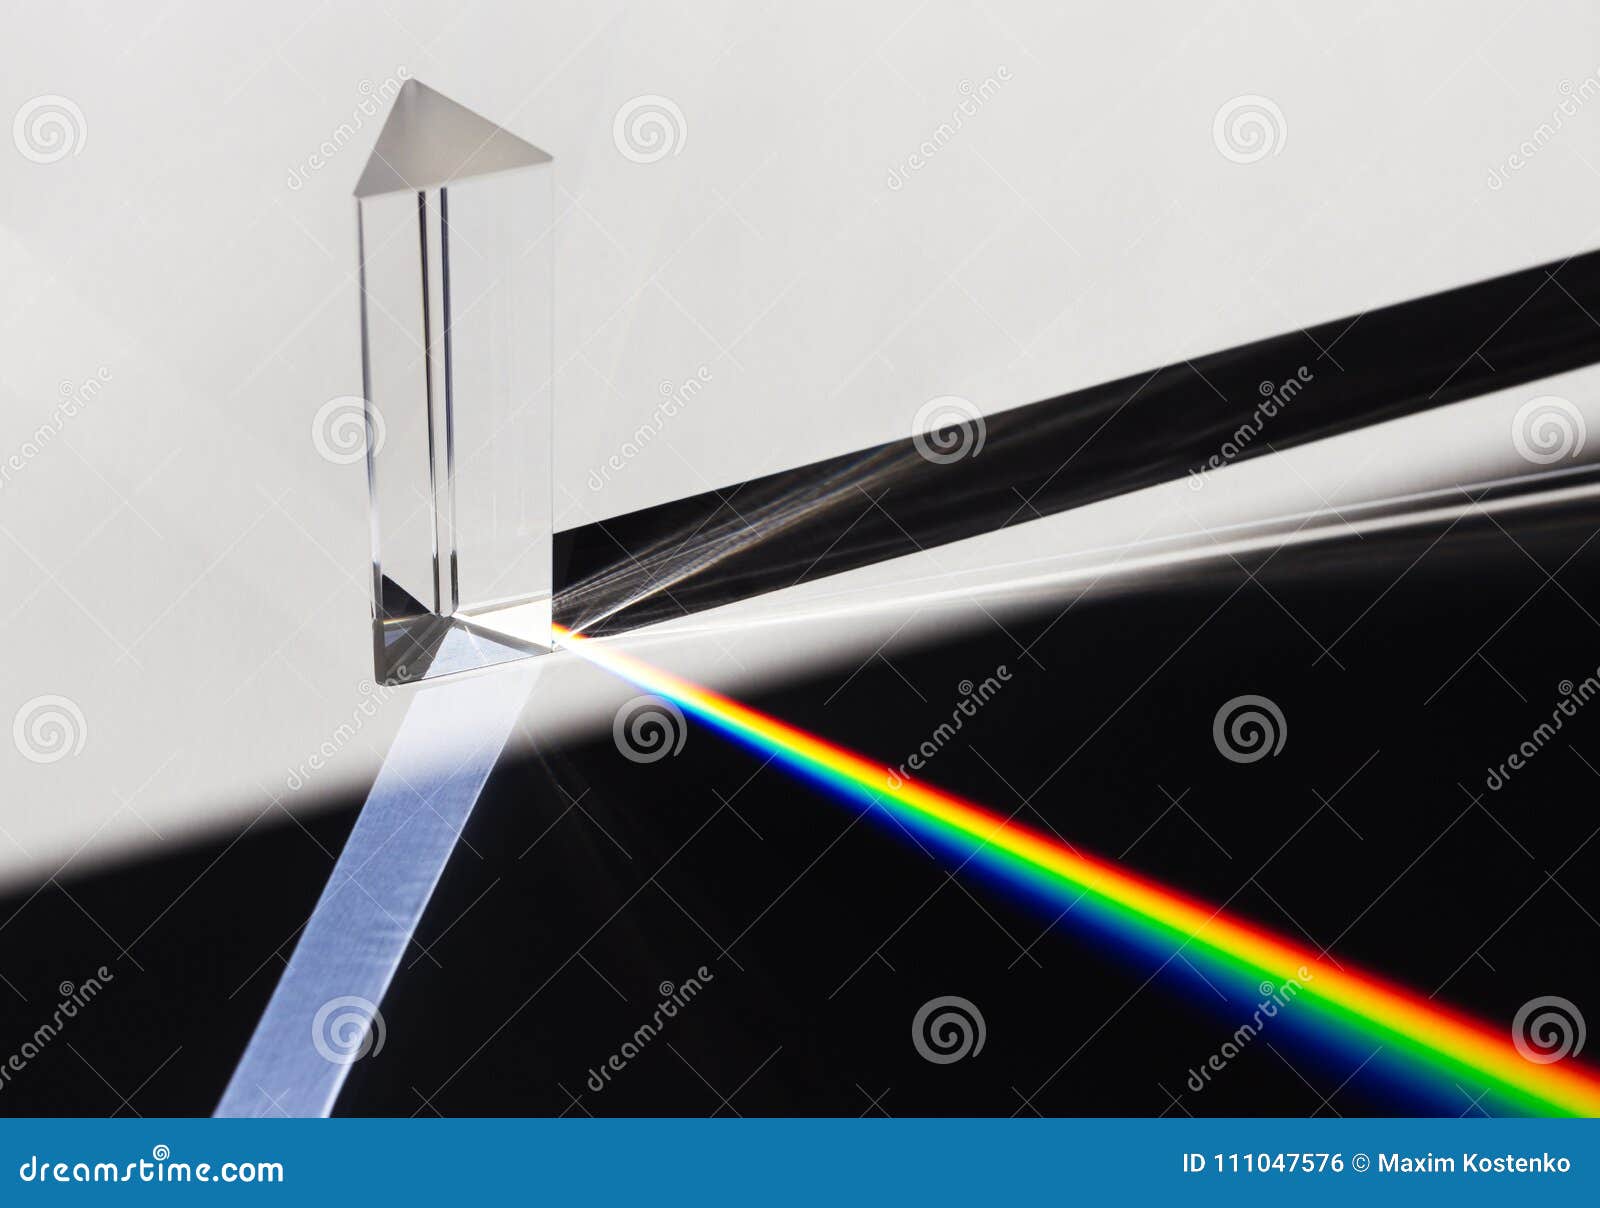 a prism dispersing sunlight splitting into a spectrum on a white background.